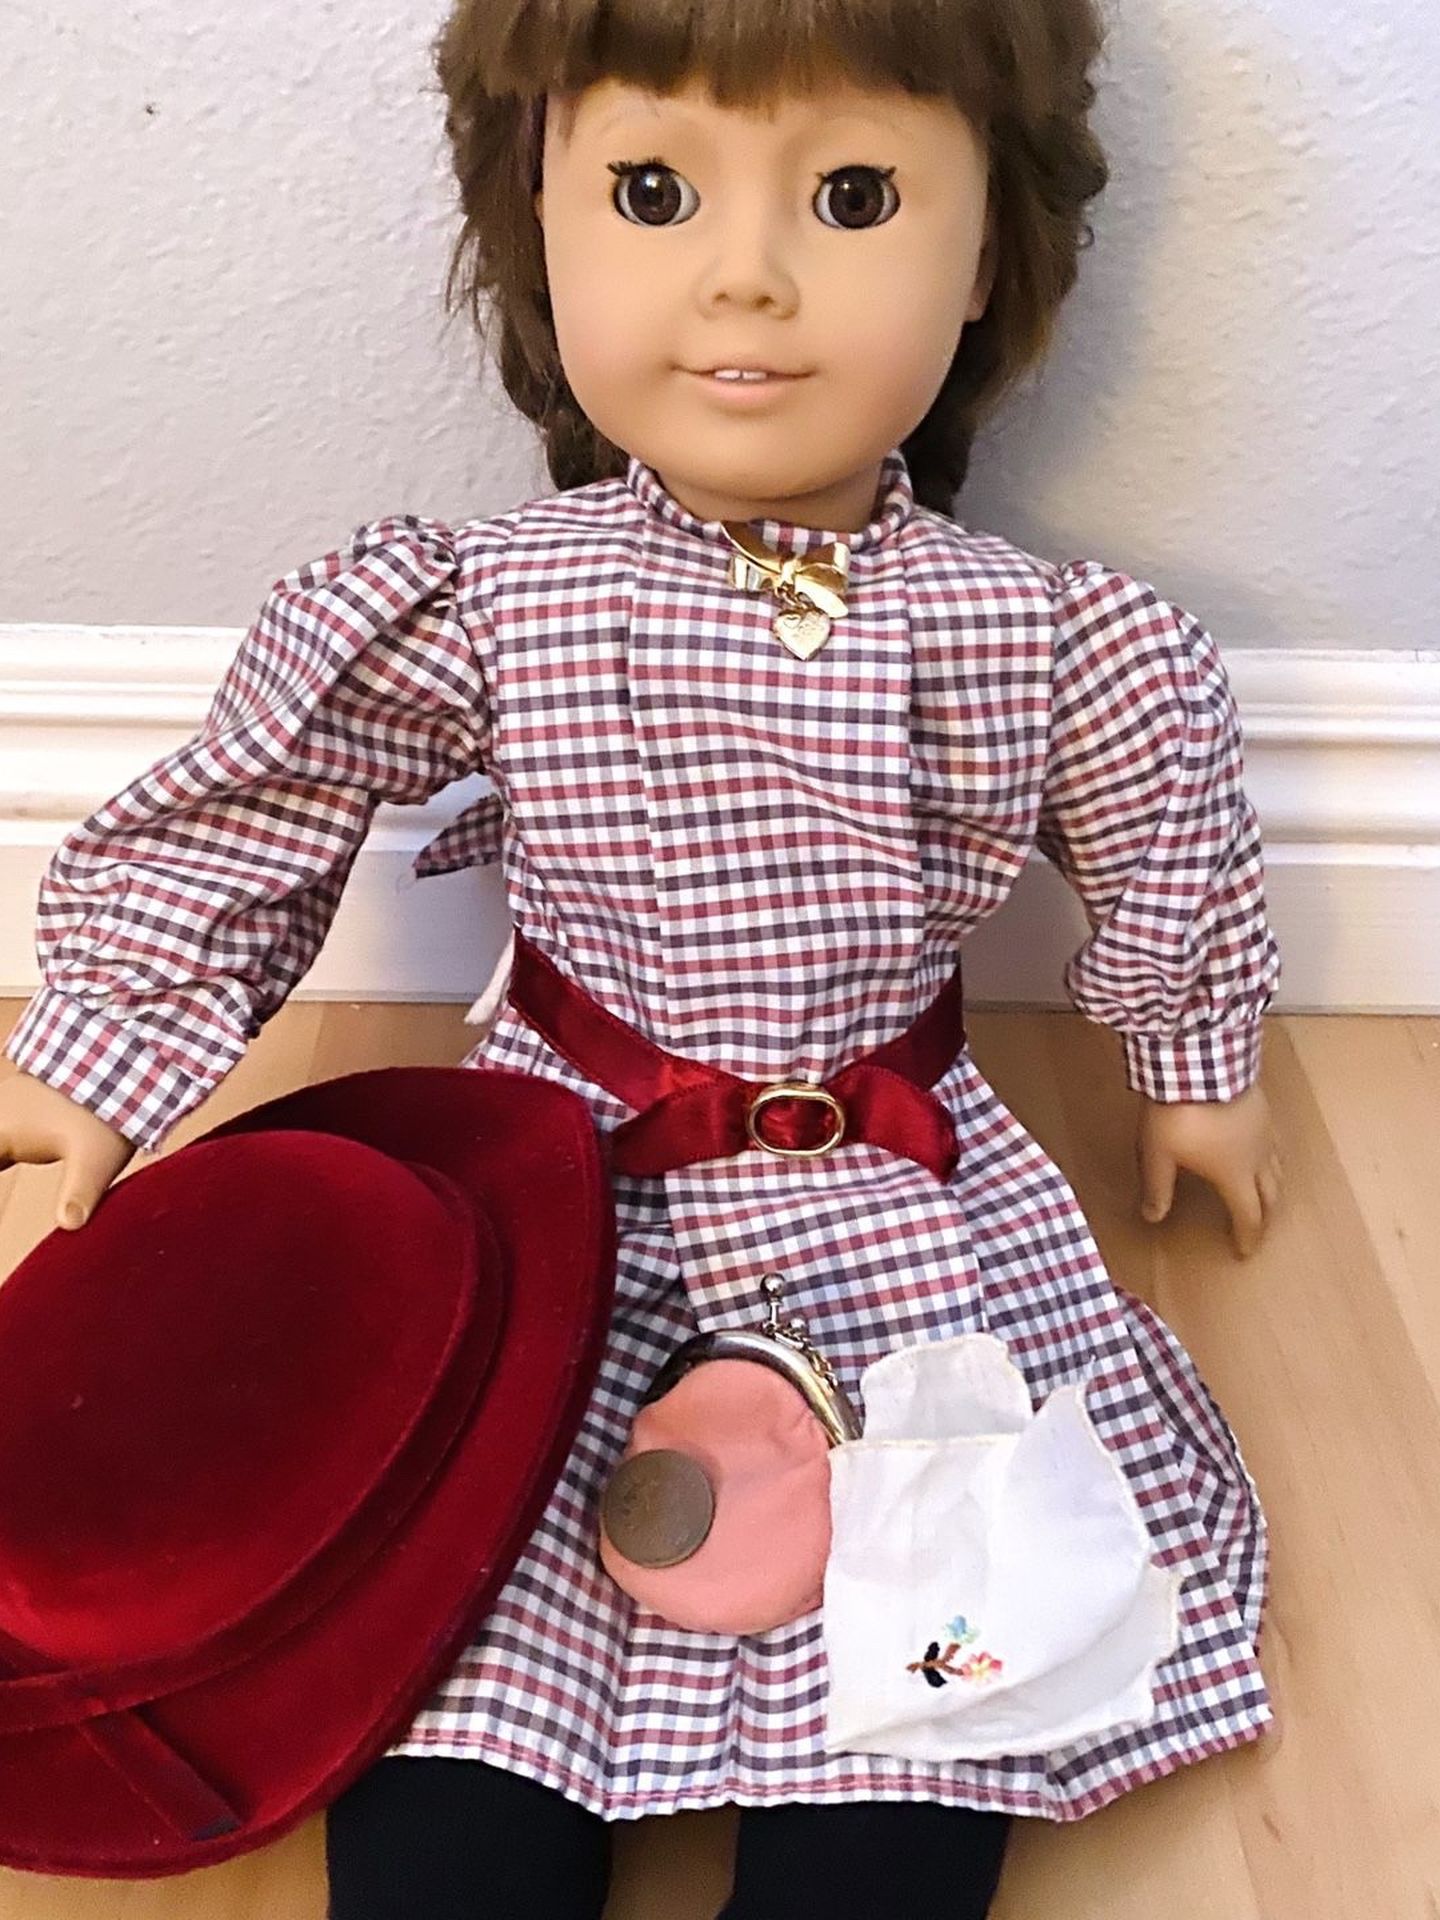 American Girl Doll • Retired white body Samantha with “Meet” outfit